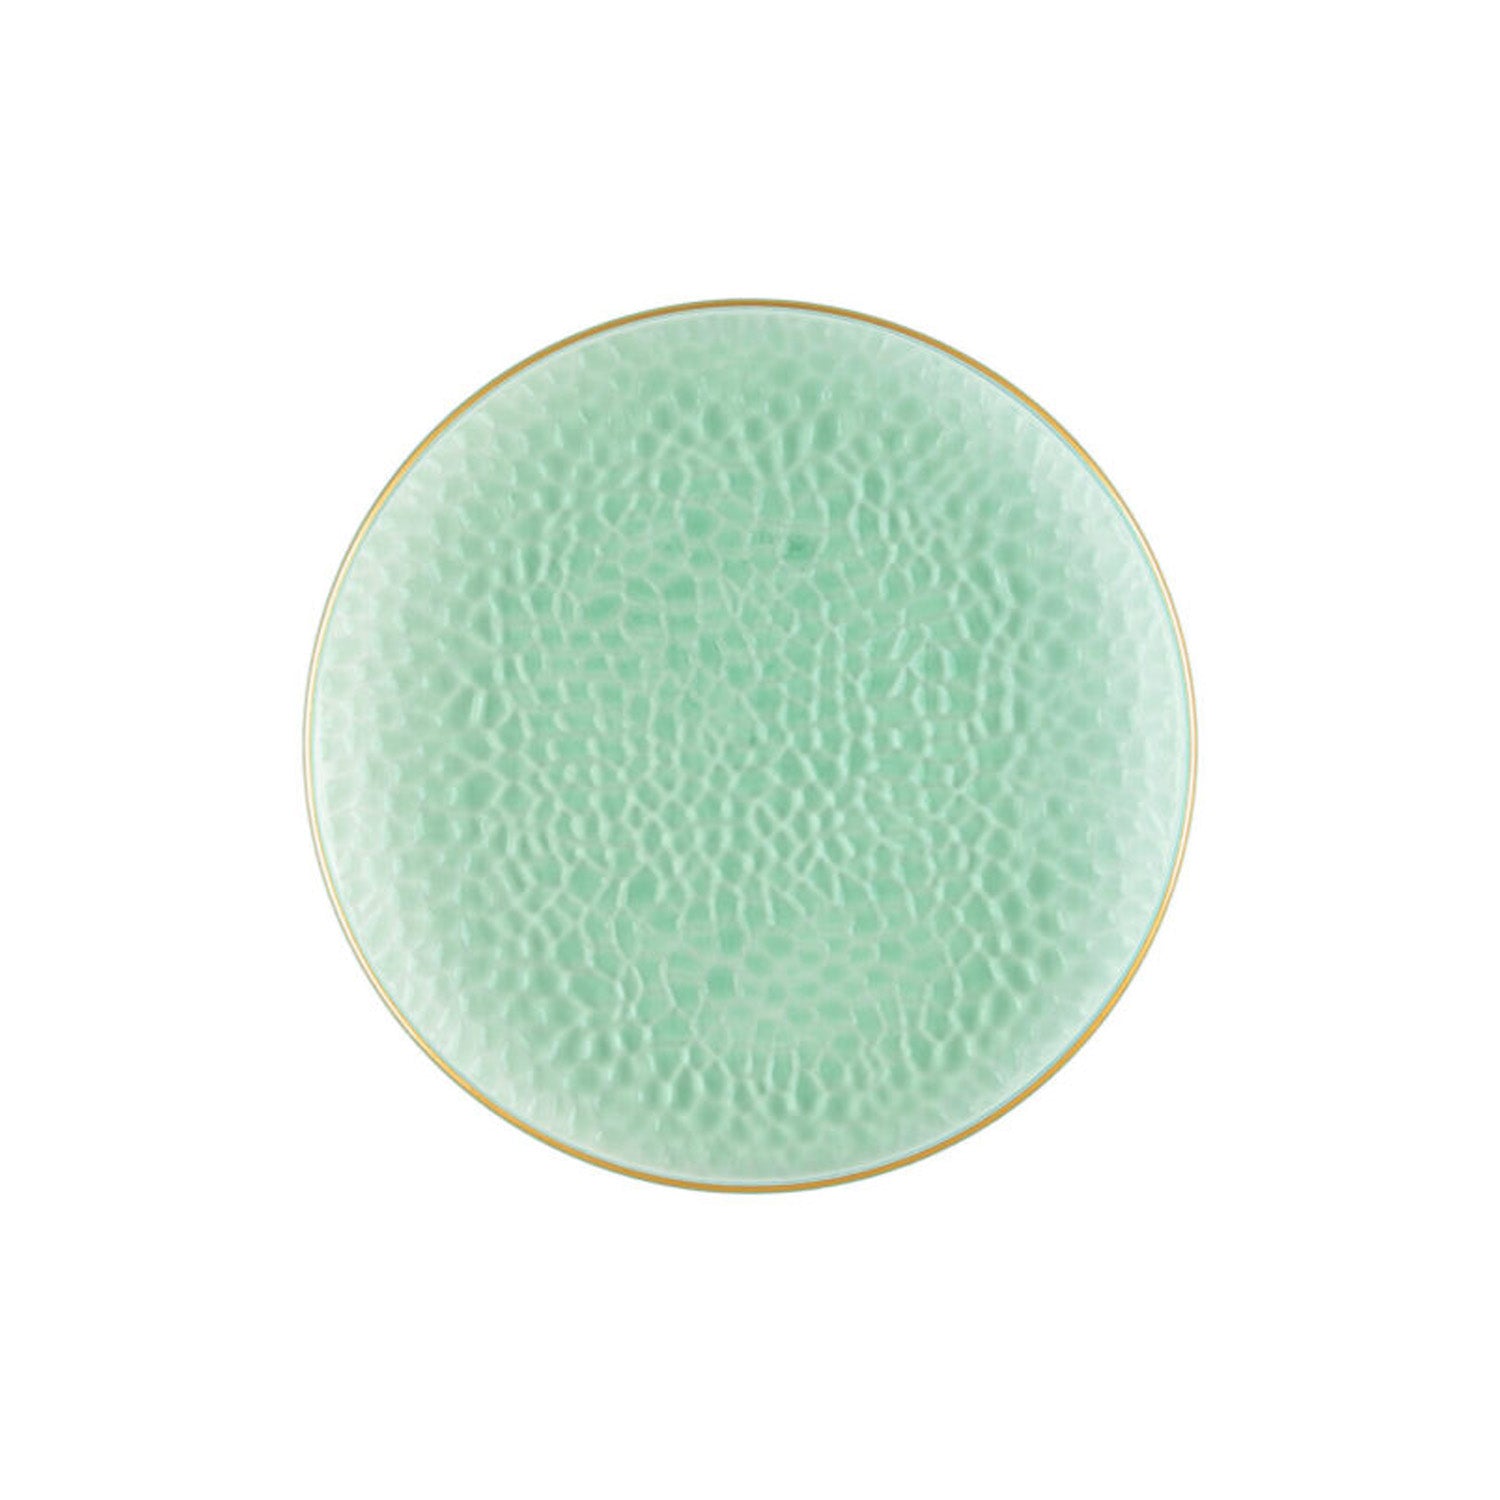 Organic Hammered Green Gold Rim 7″ Plates Tablesettings Blue Sky 10 Pieces  